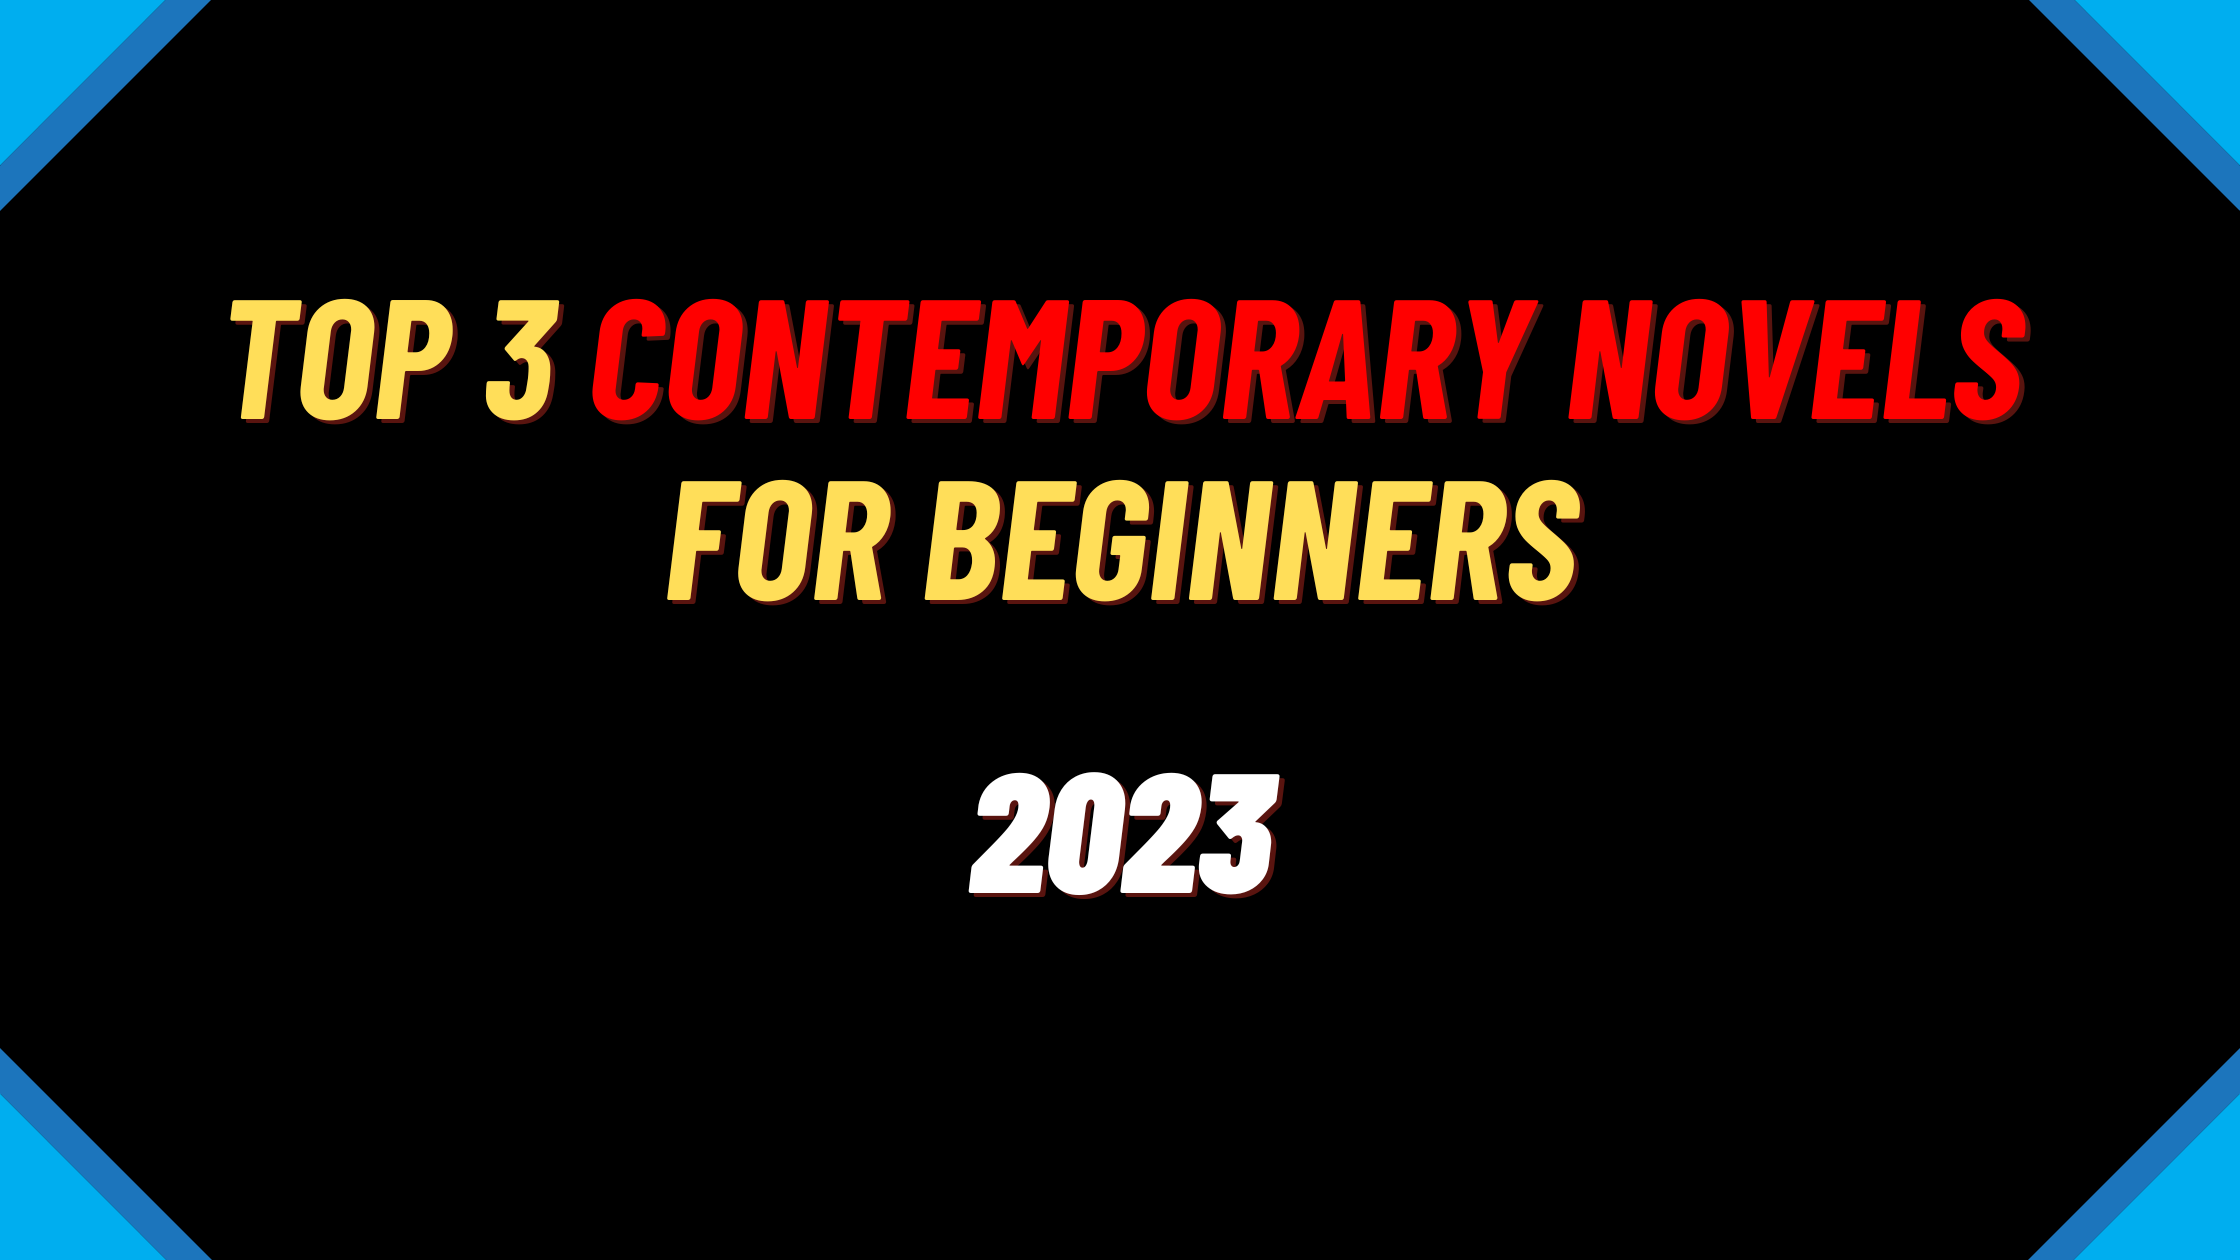 Top 3 Contemporary Novels for Beginners 2023